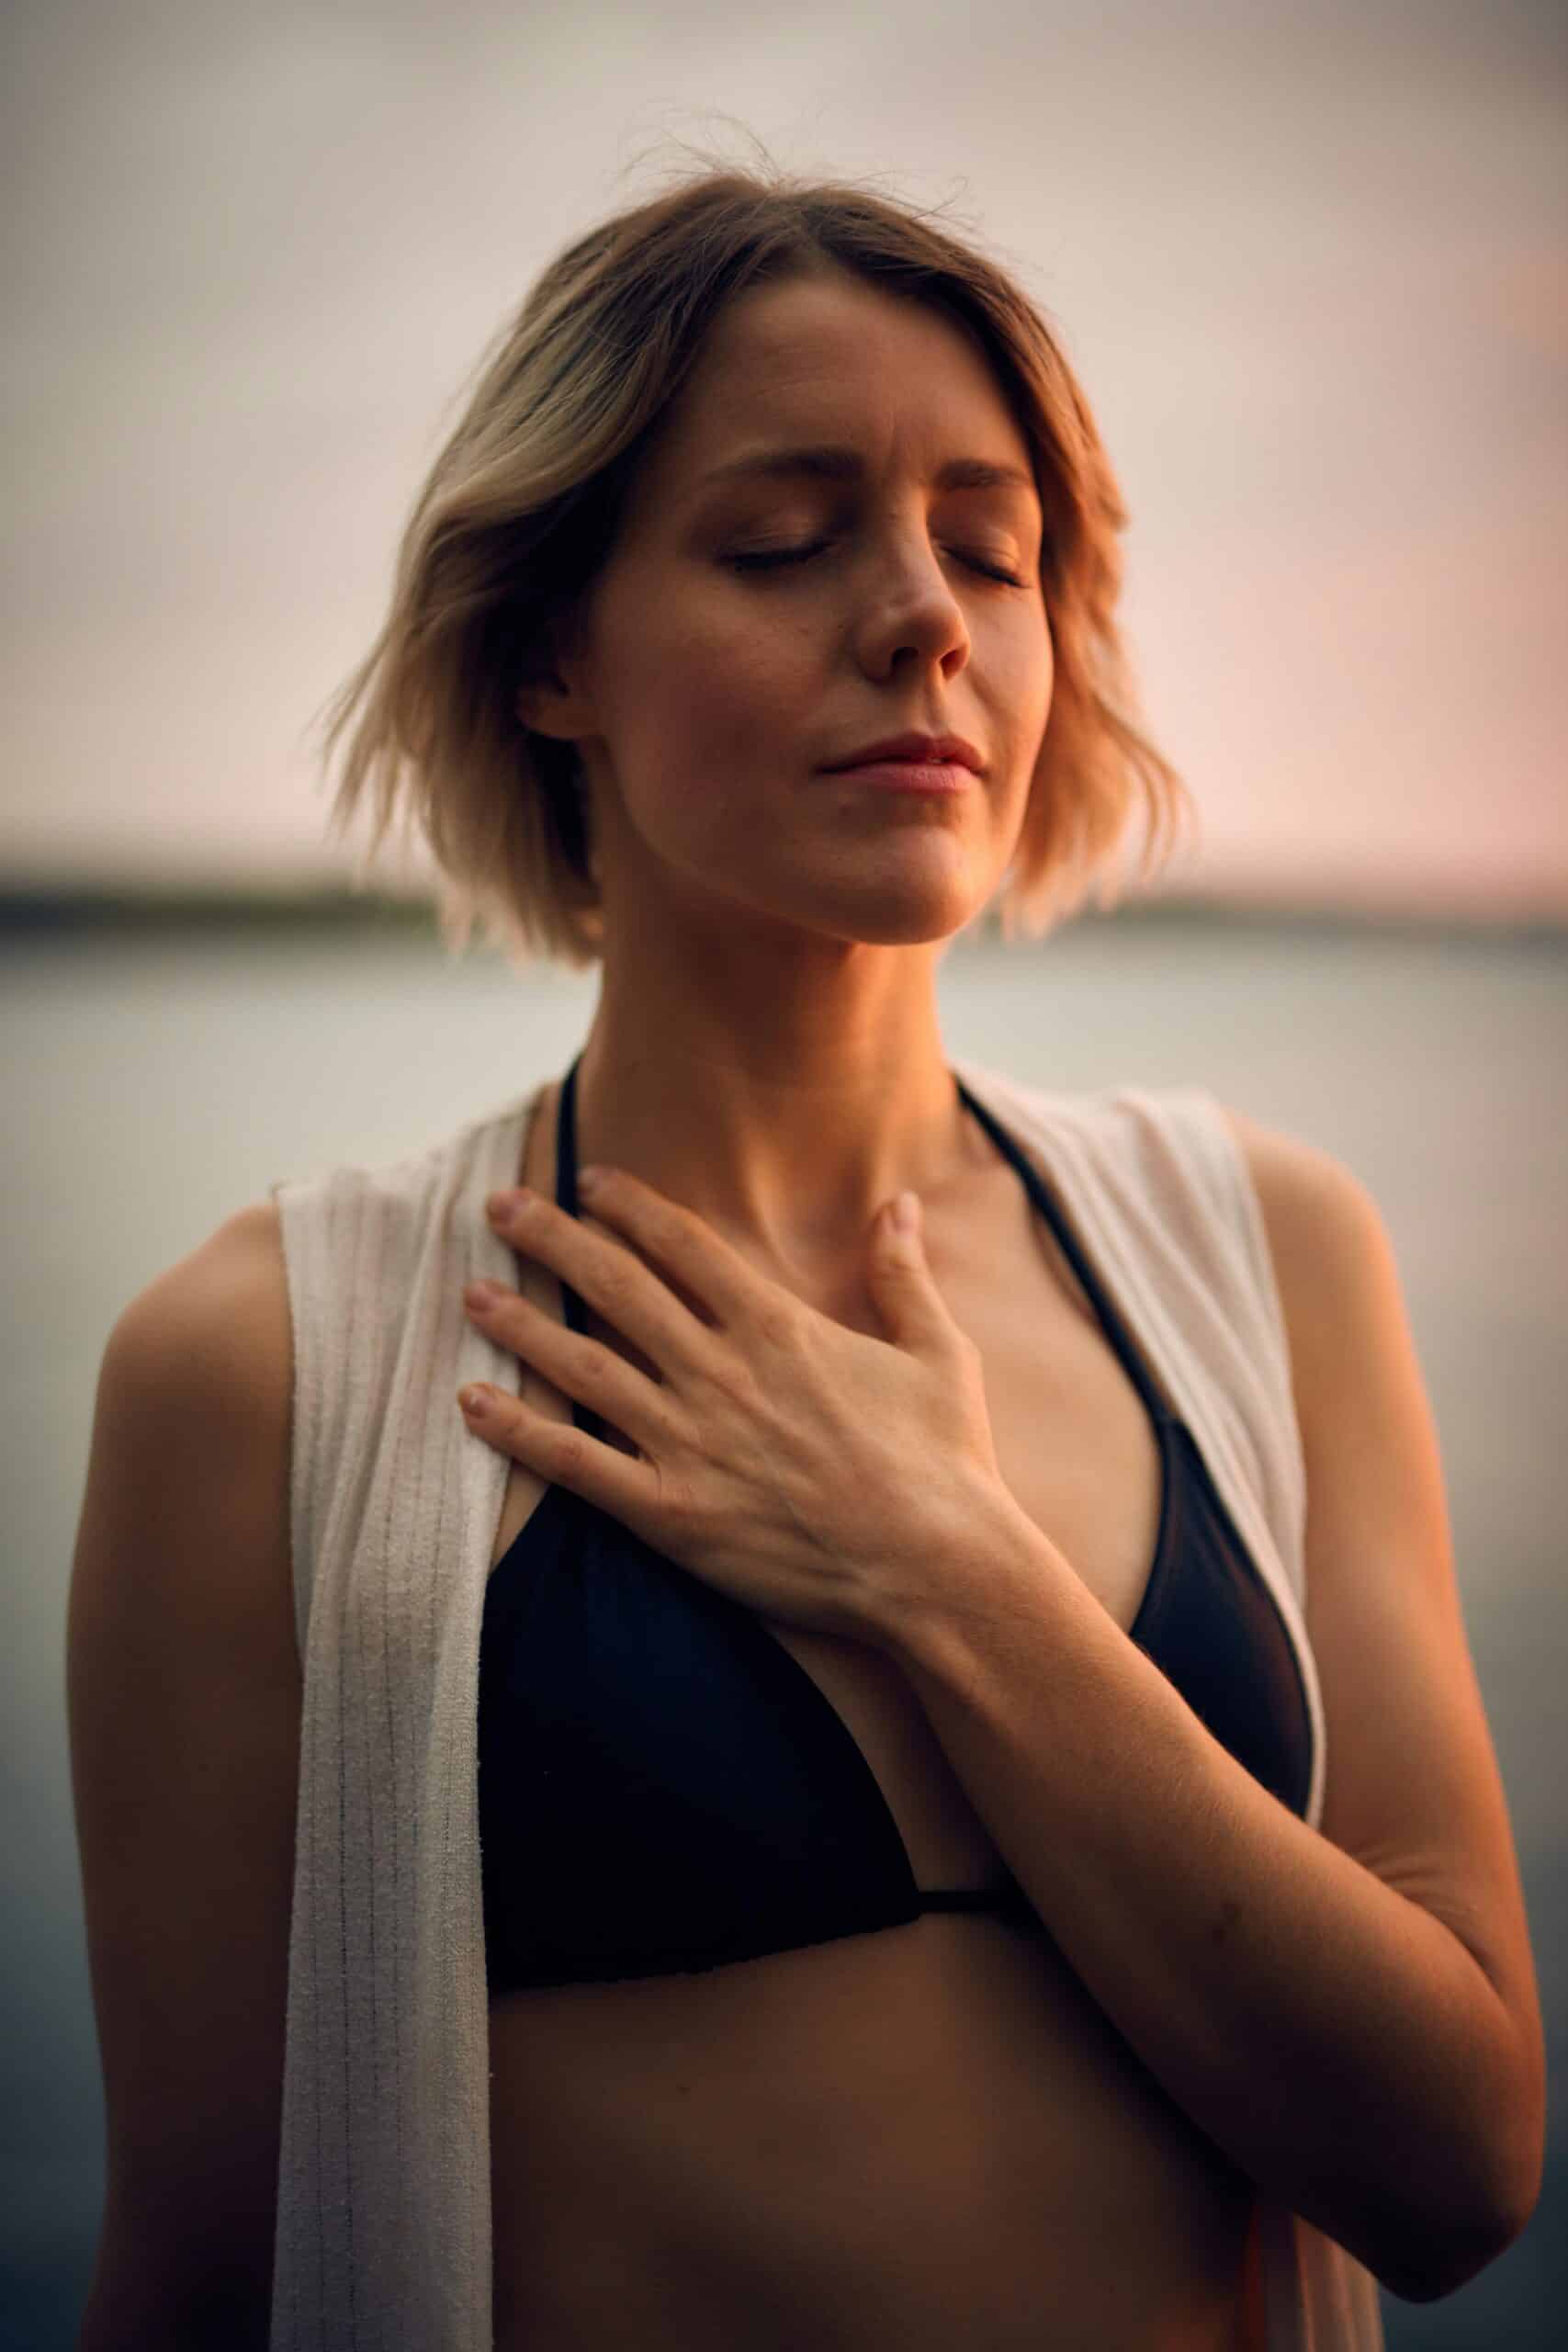 Woman stands, eyes closed, facing the setting sun and placing her hand on her chest as she breaths deeply